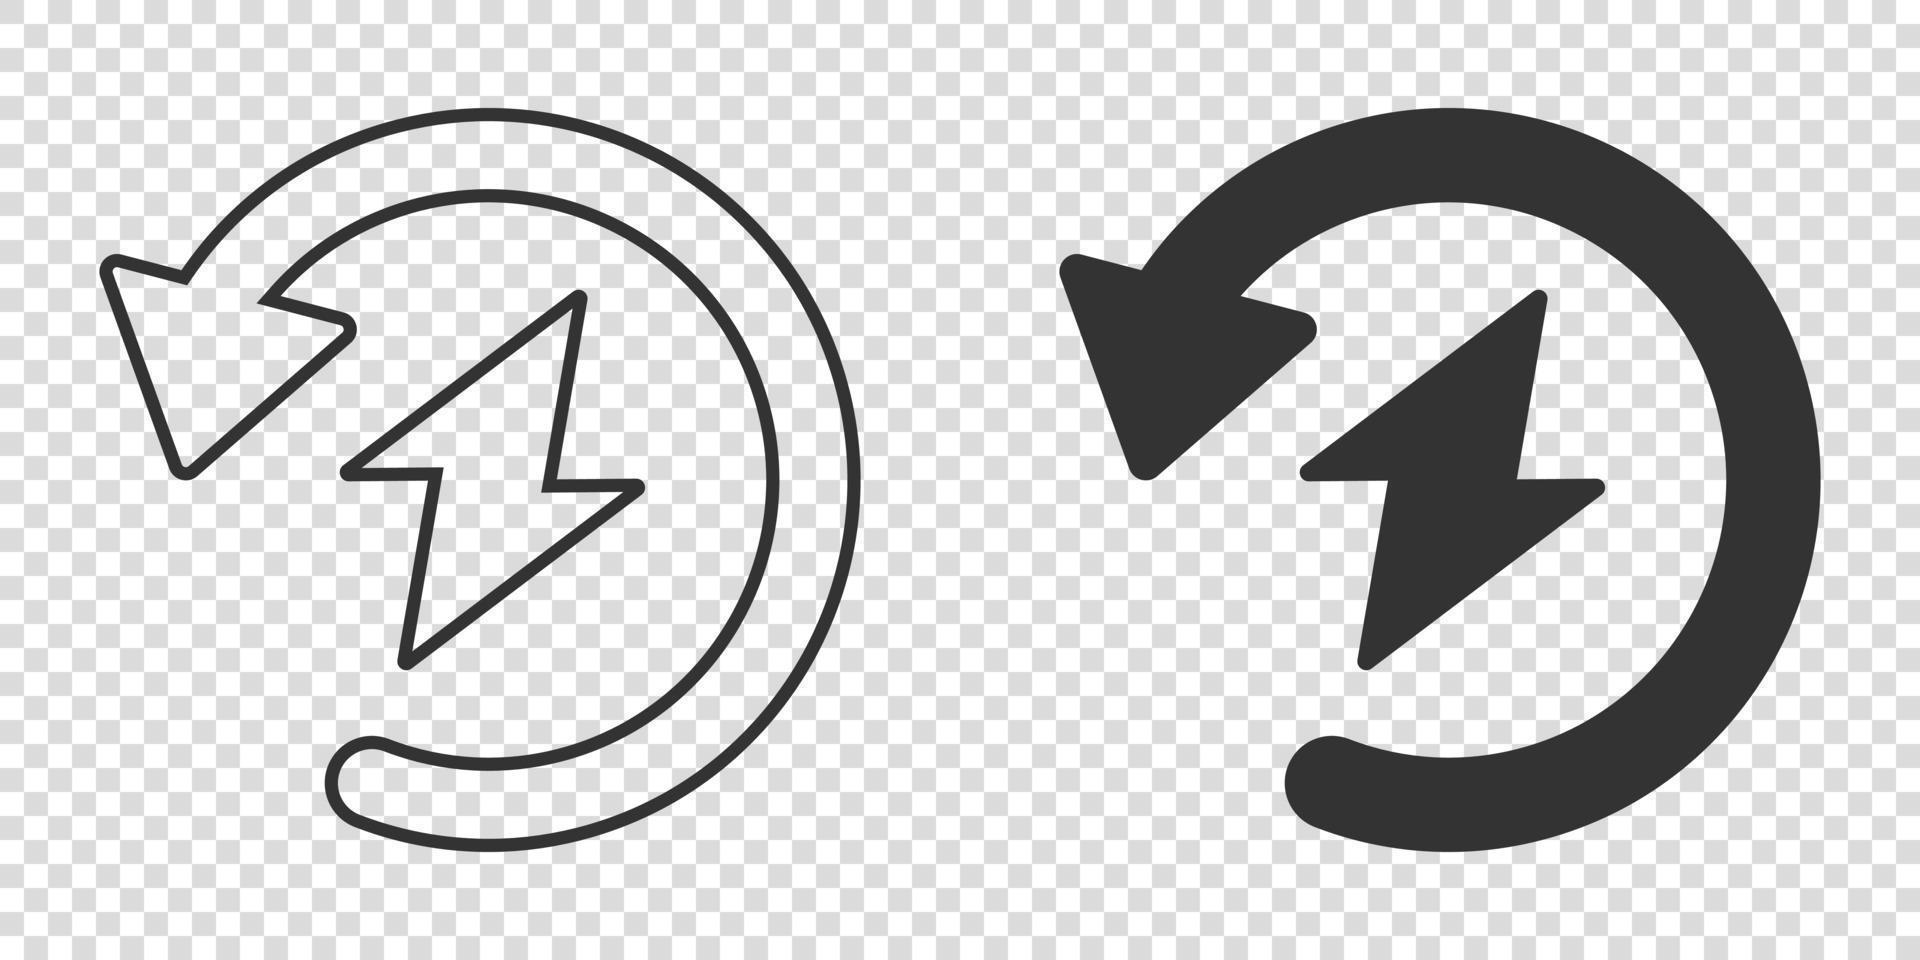 Energy recharge icon in flat style. Voltage and arrow vector illustration on white isolated background. Electric sign business concept.